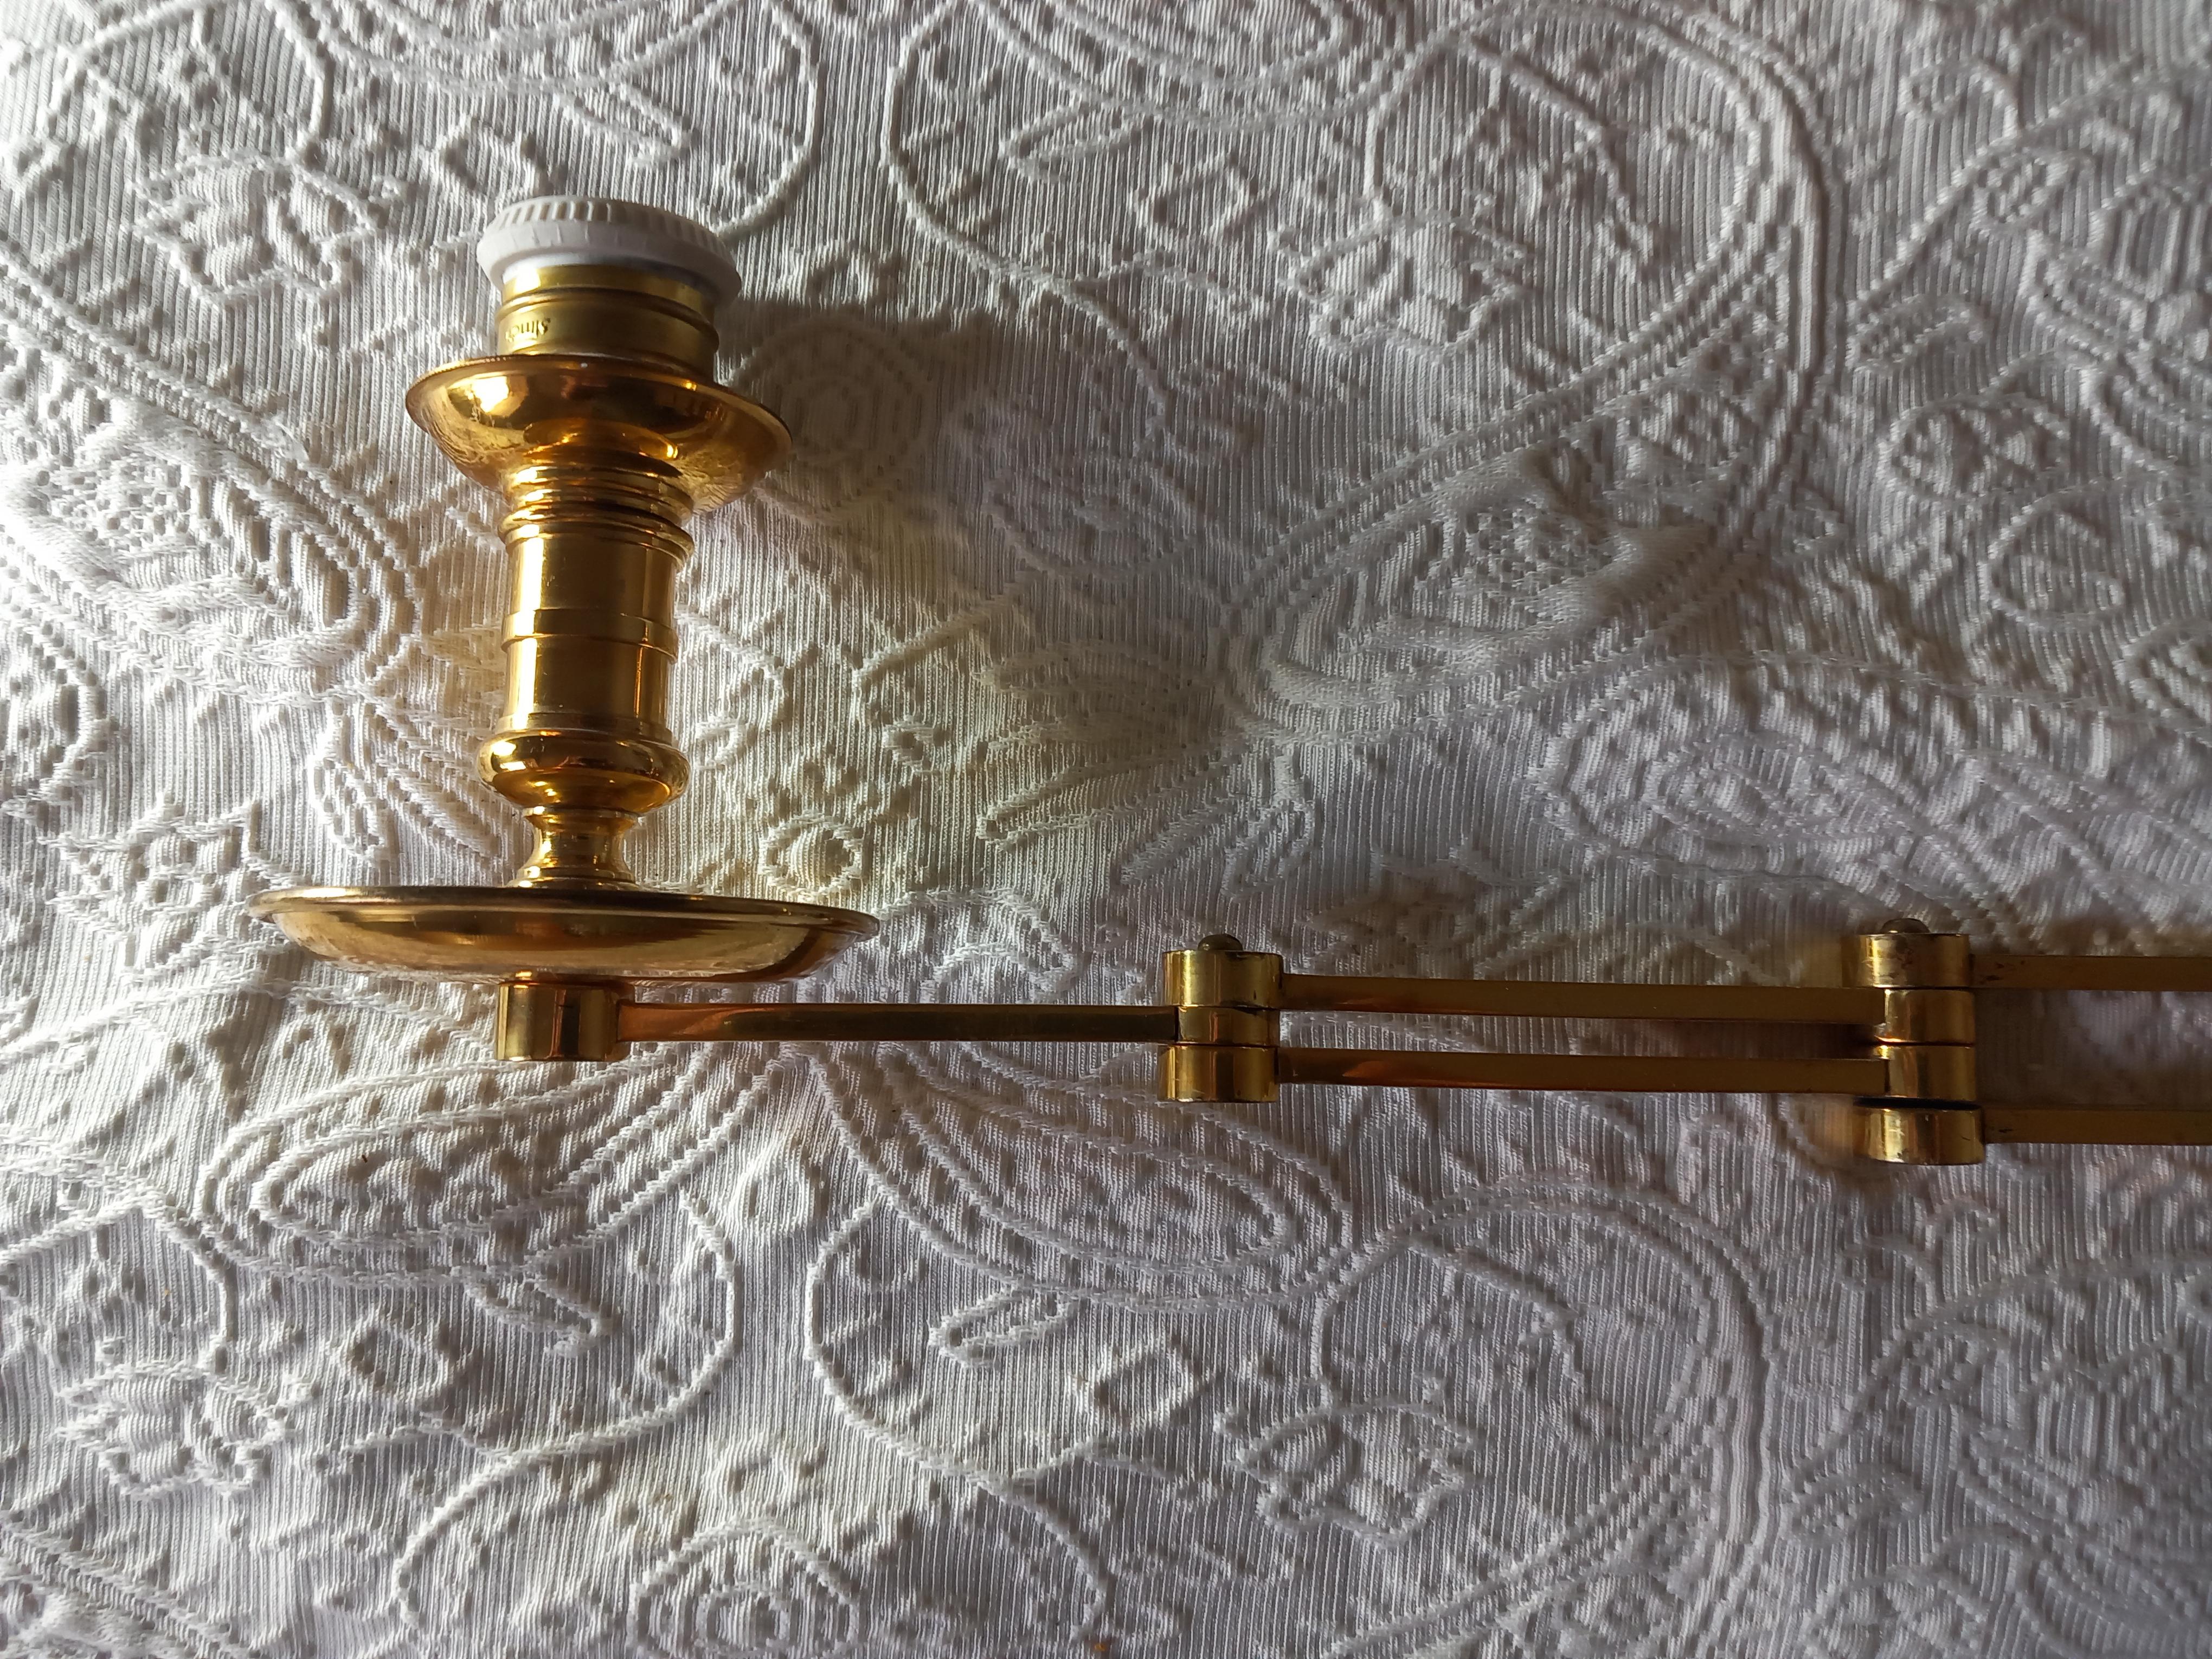  Pair of French Maison Jansen Swing Arm Sconces For Sale 3